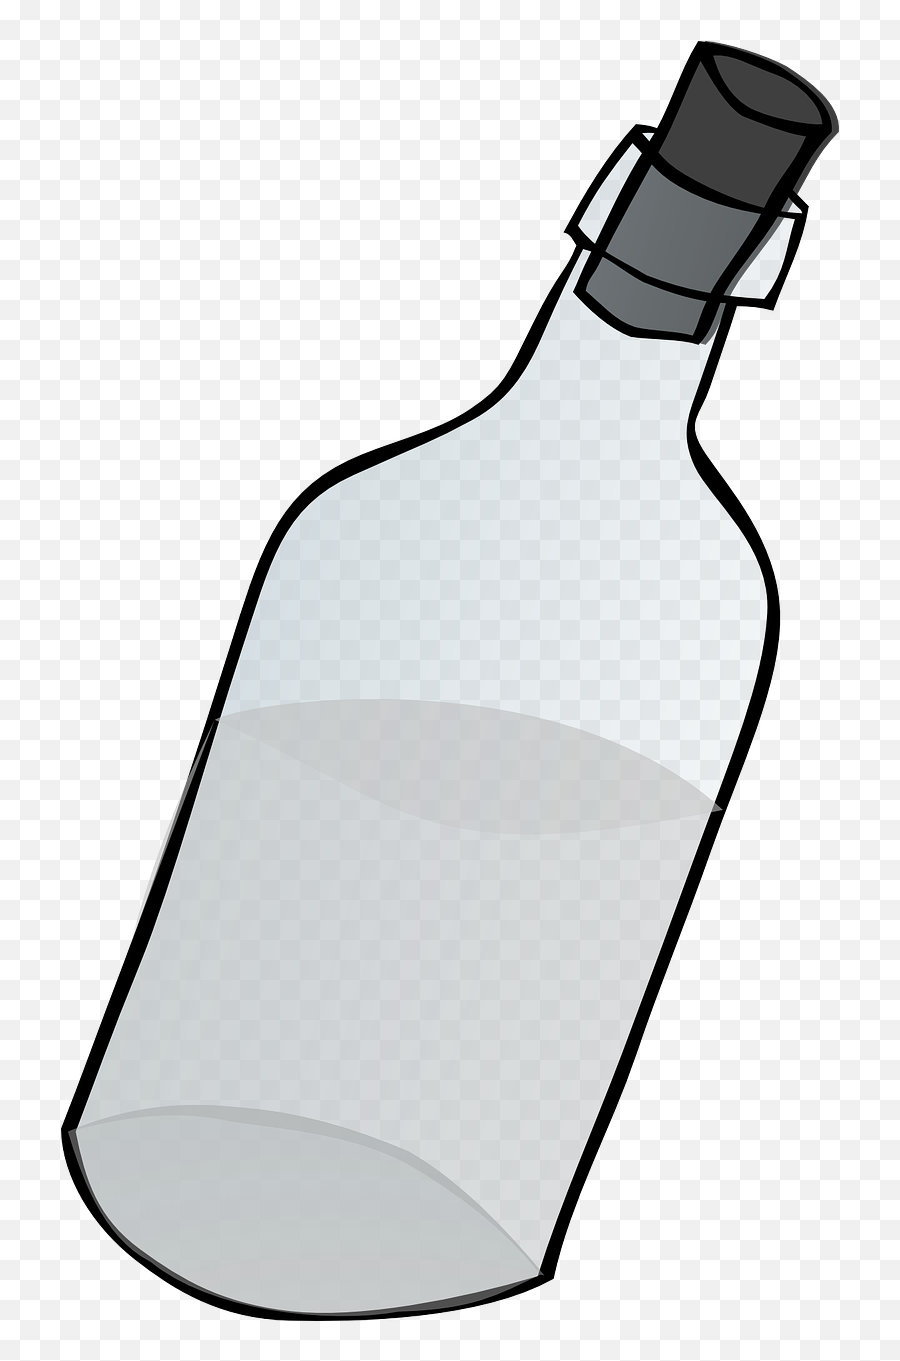 Bottle Clear Glass - Free Vector Graphic On Pixabay Glass Bottle Black And White Clipart Png,Water Bottle Clipart Png